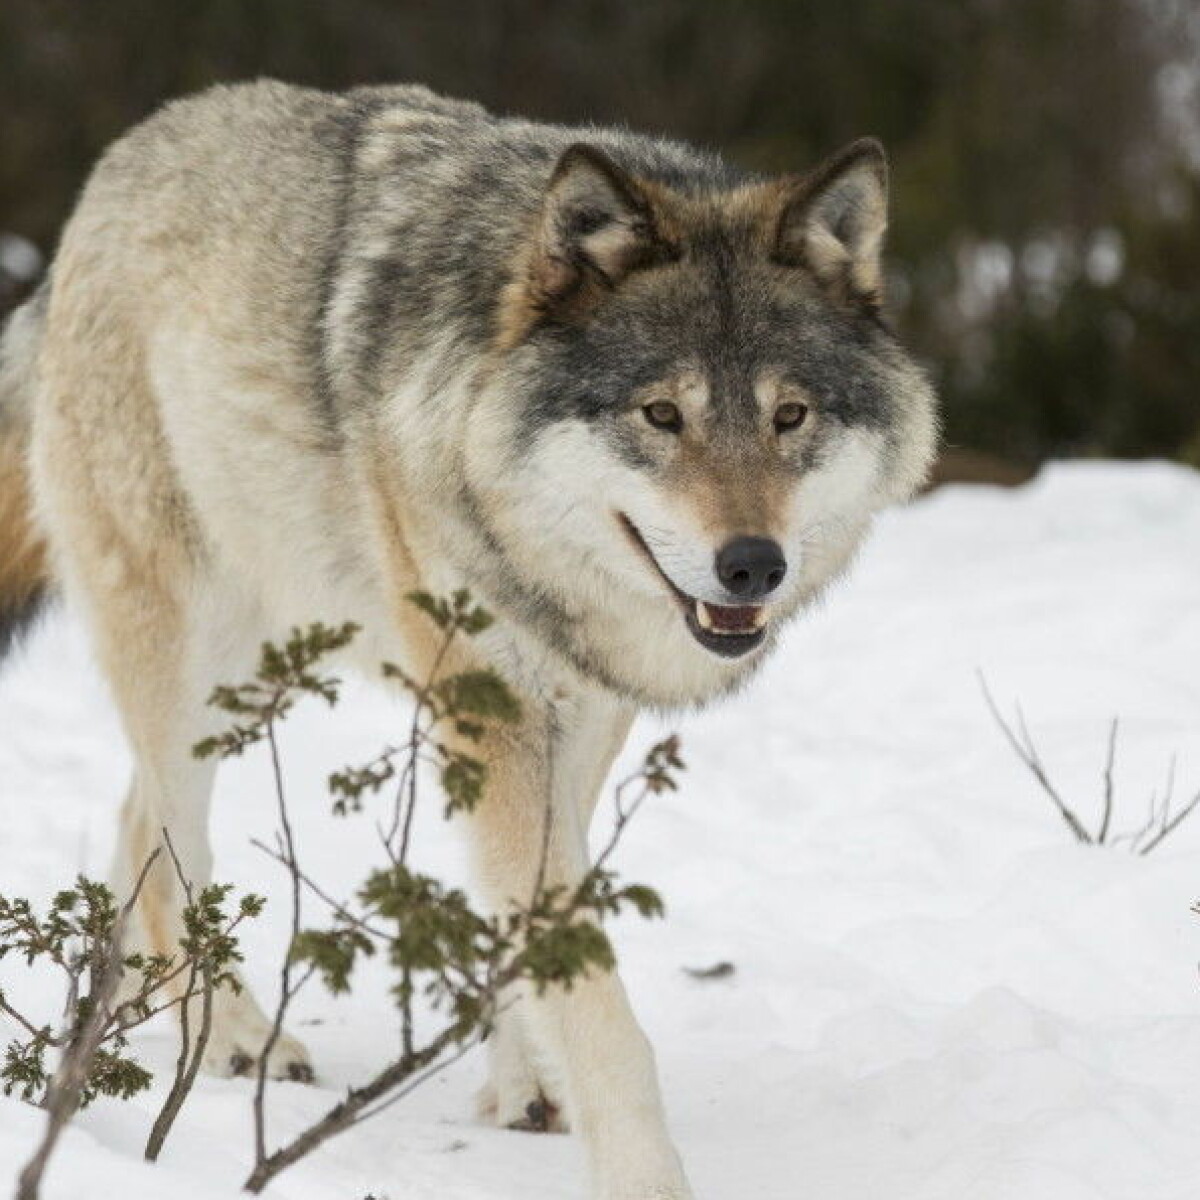 What kind of person supports illegal hunting of Norway's wolves?